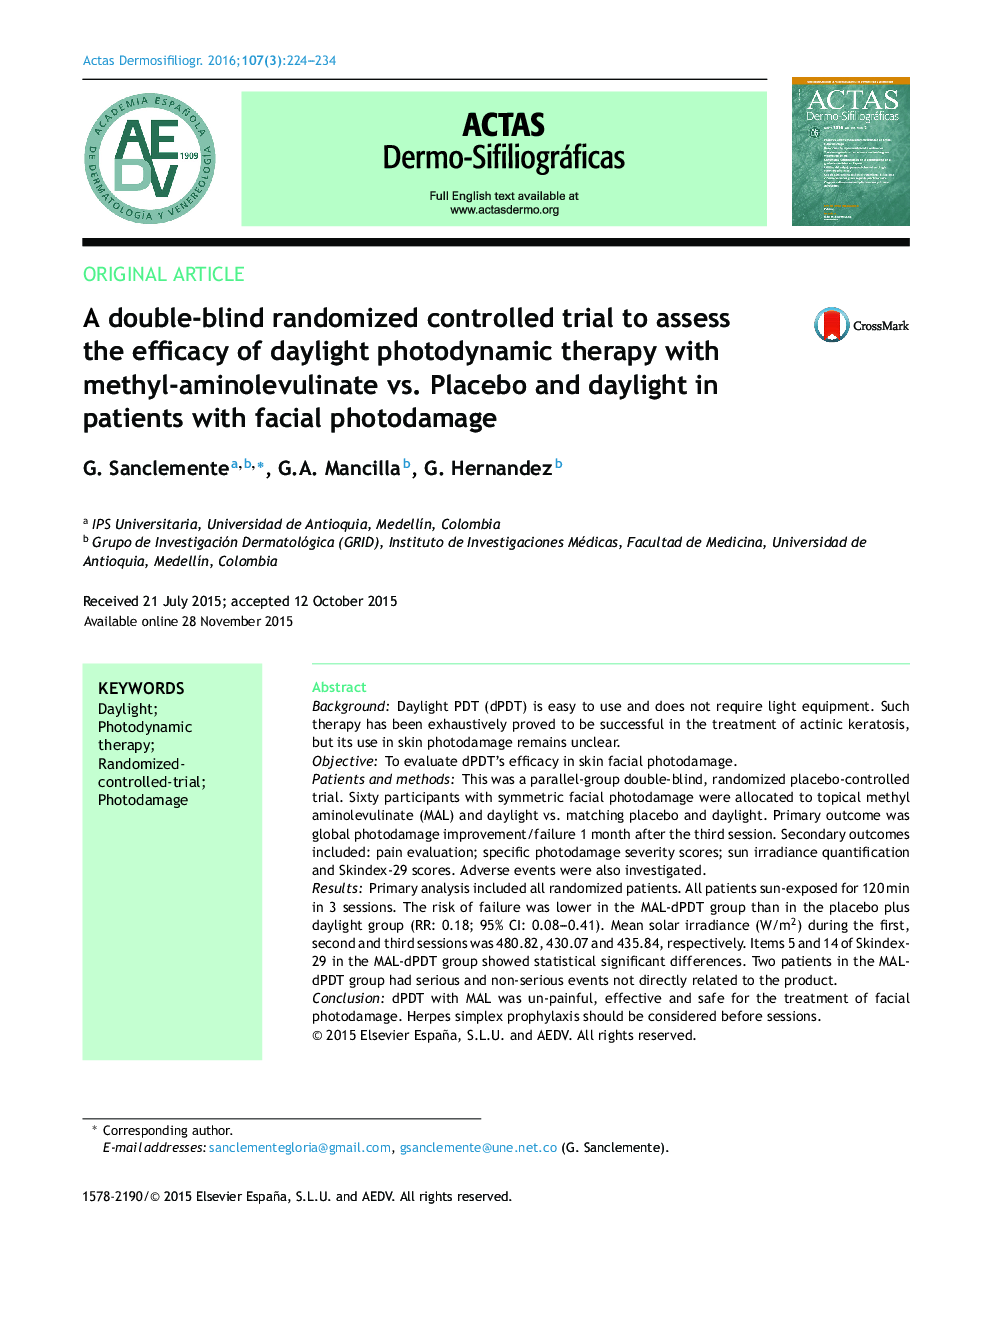 A double-blind randomized controlled trial to assess the efficacy of daylight photodynamic therapy with methyl-aminolevulinate vs. Placebo and daylight in patients with facial photodamage